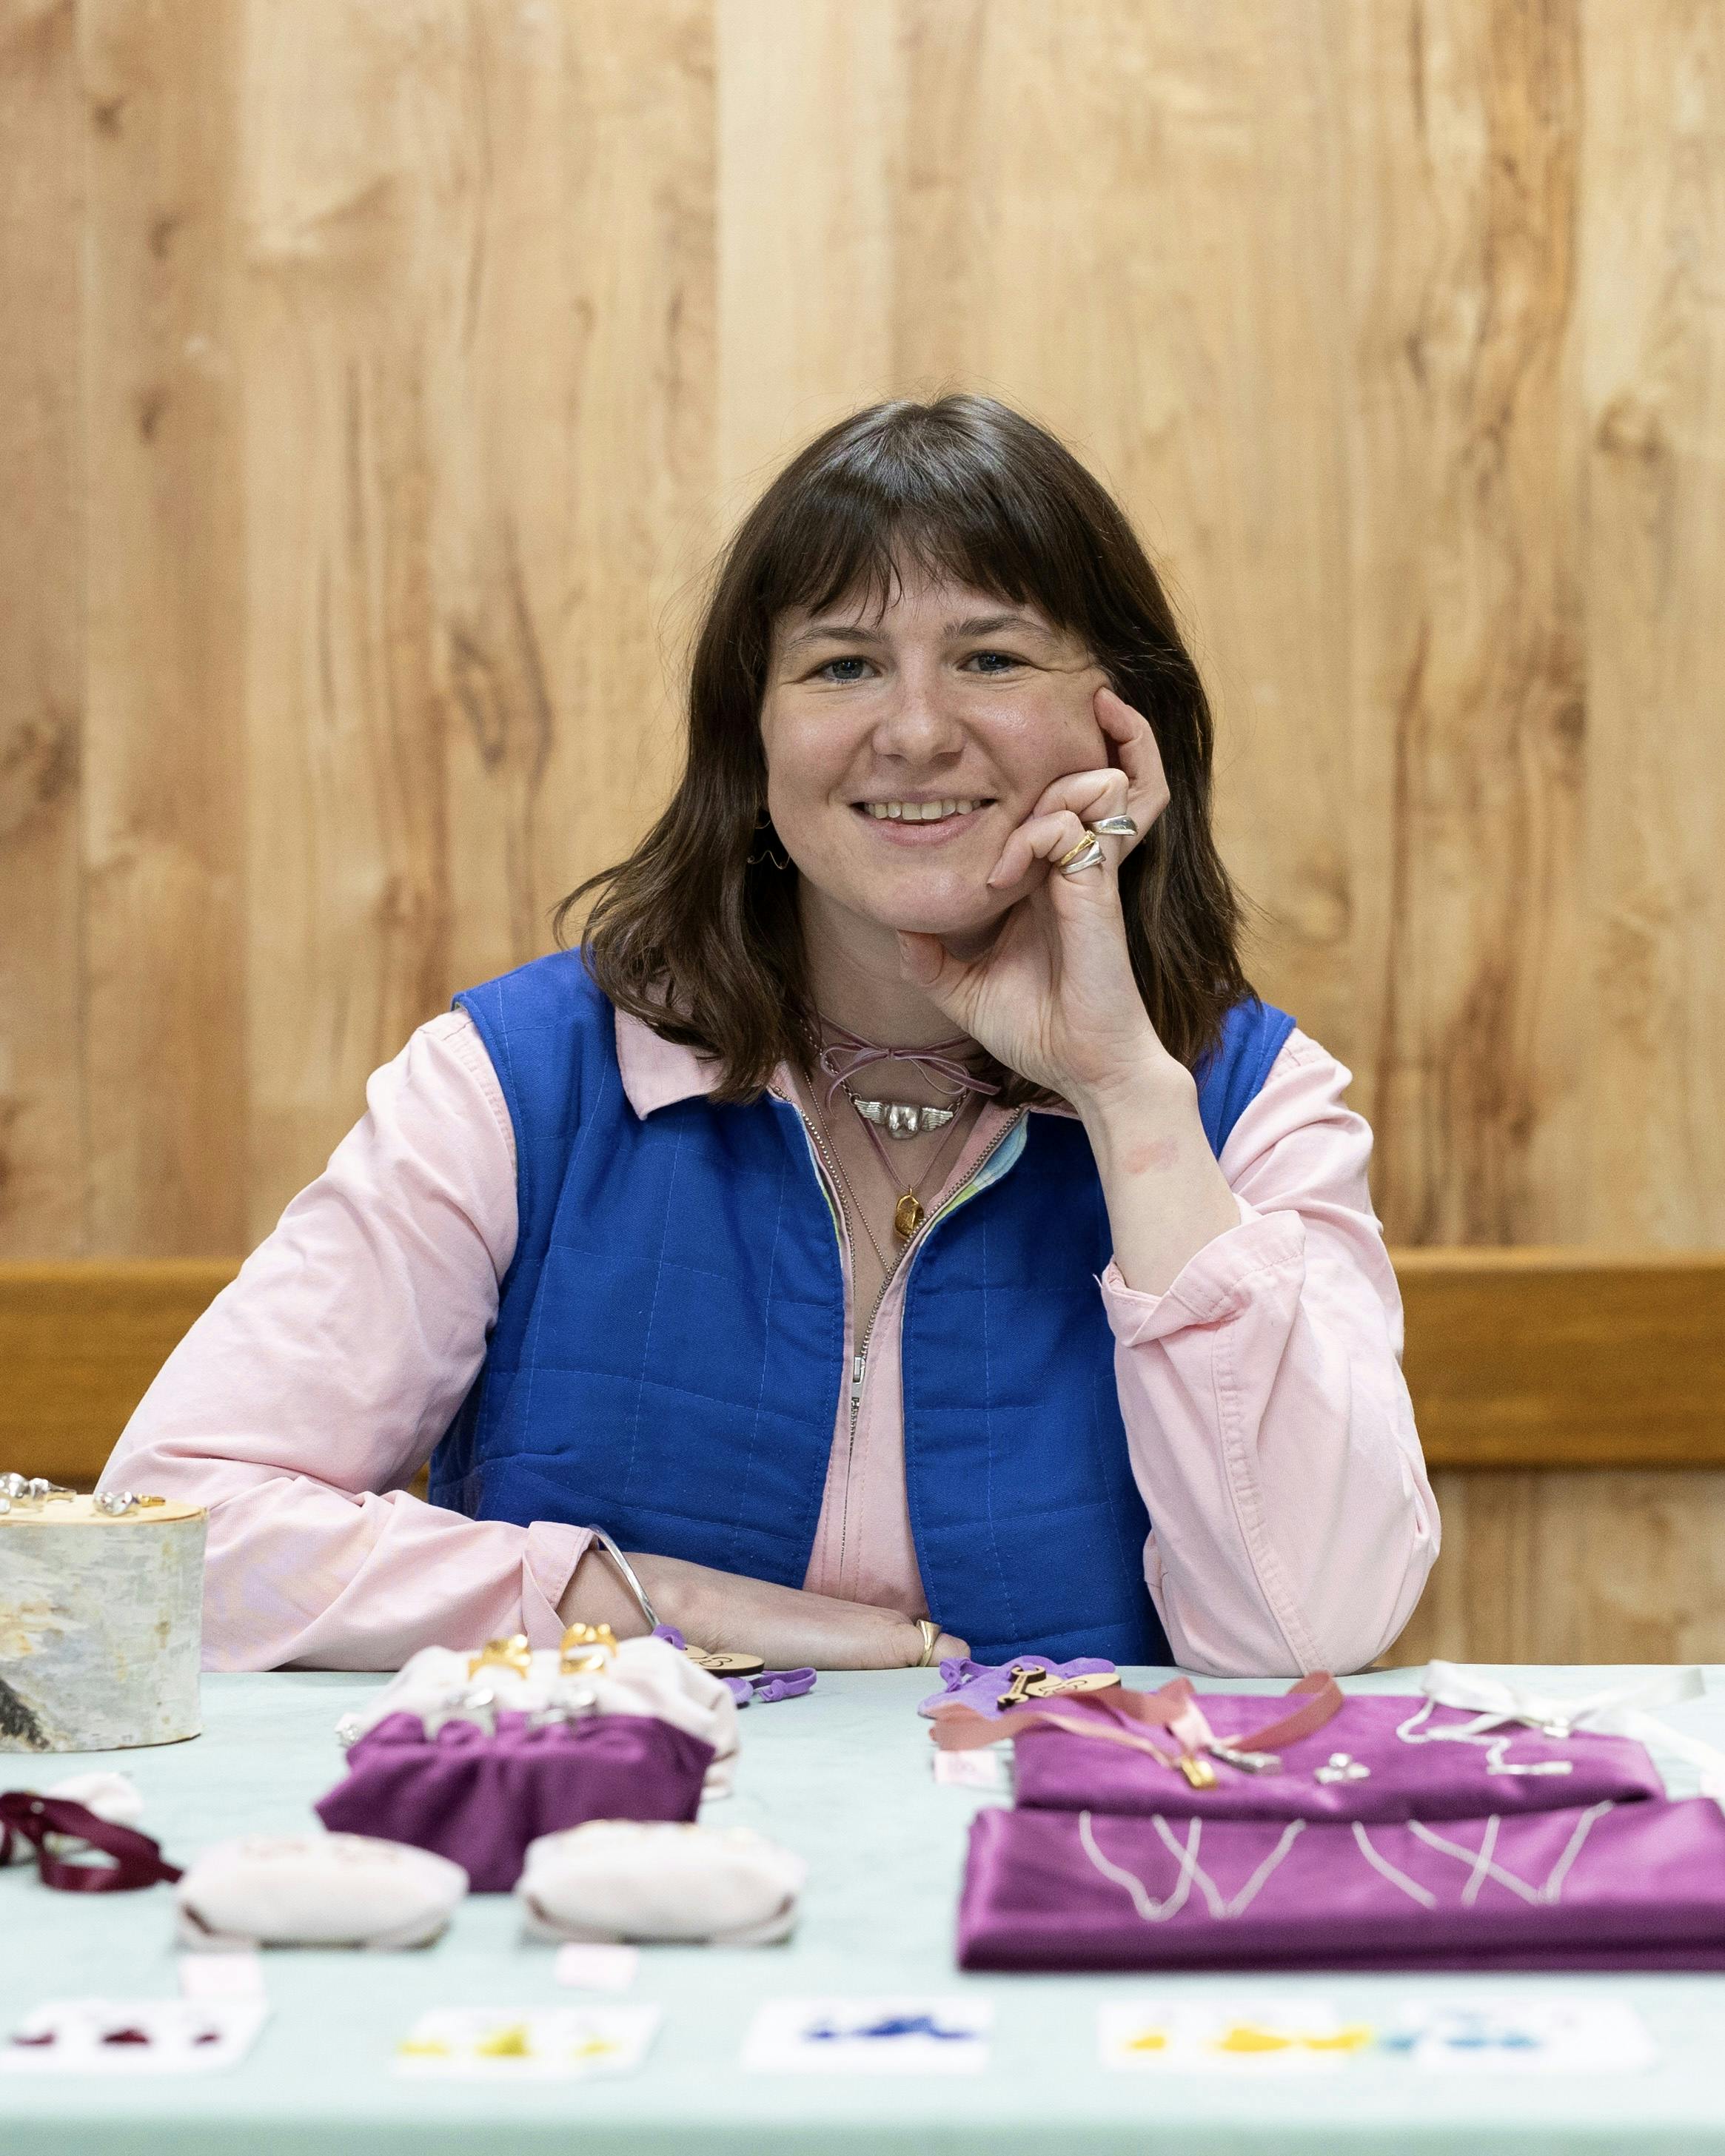 The image features a woman, Gini Dickenson, sitting at a table indoors. She is wearing purple clothing and is smiling. The background includes a wooden wall. 